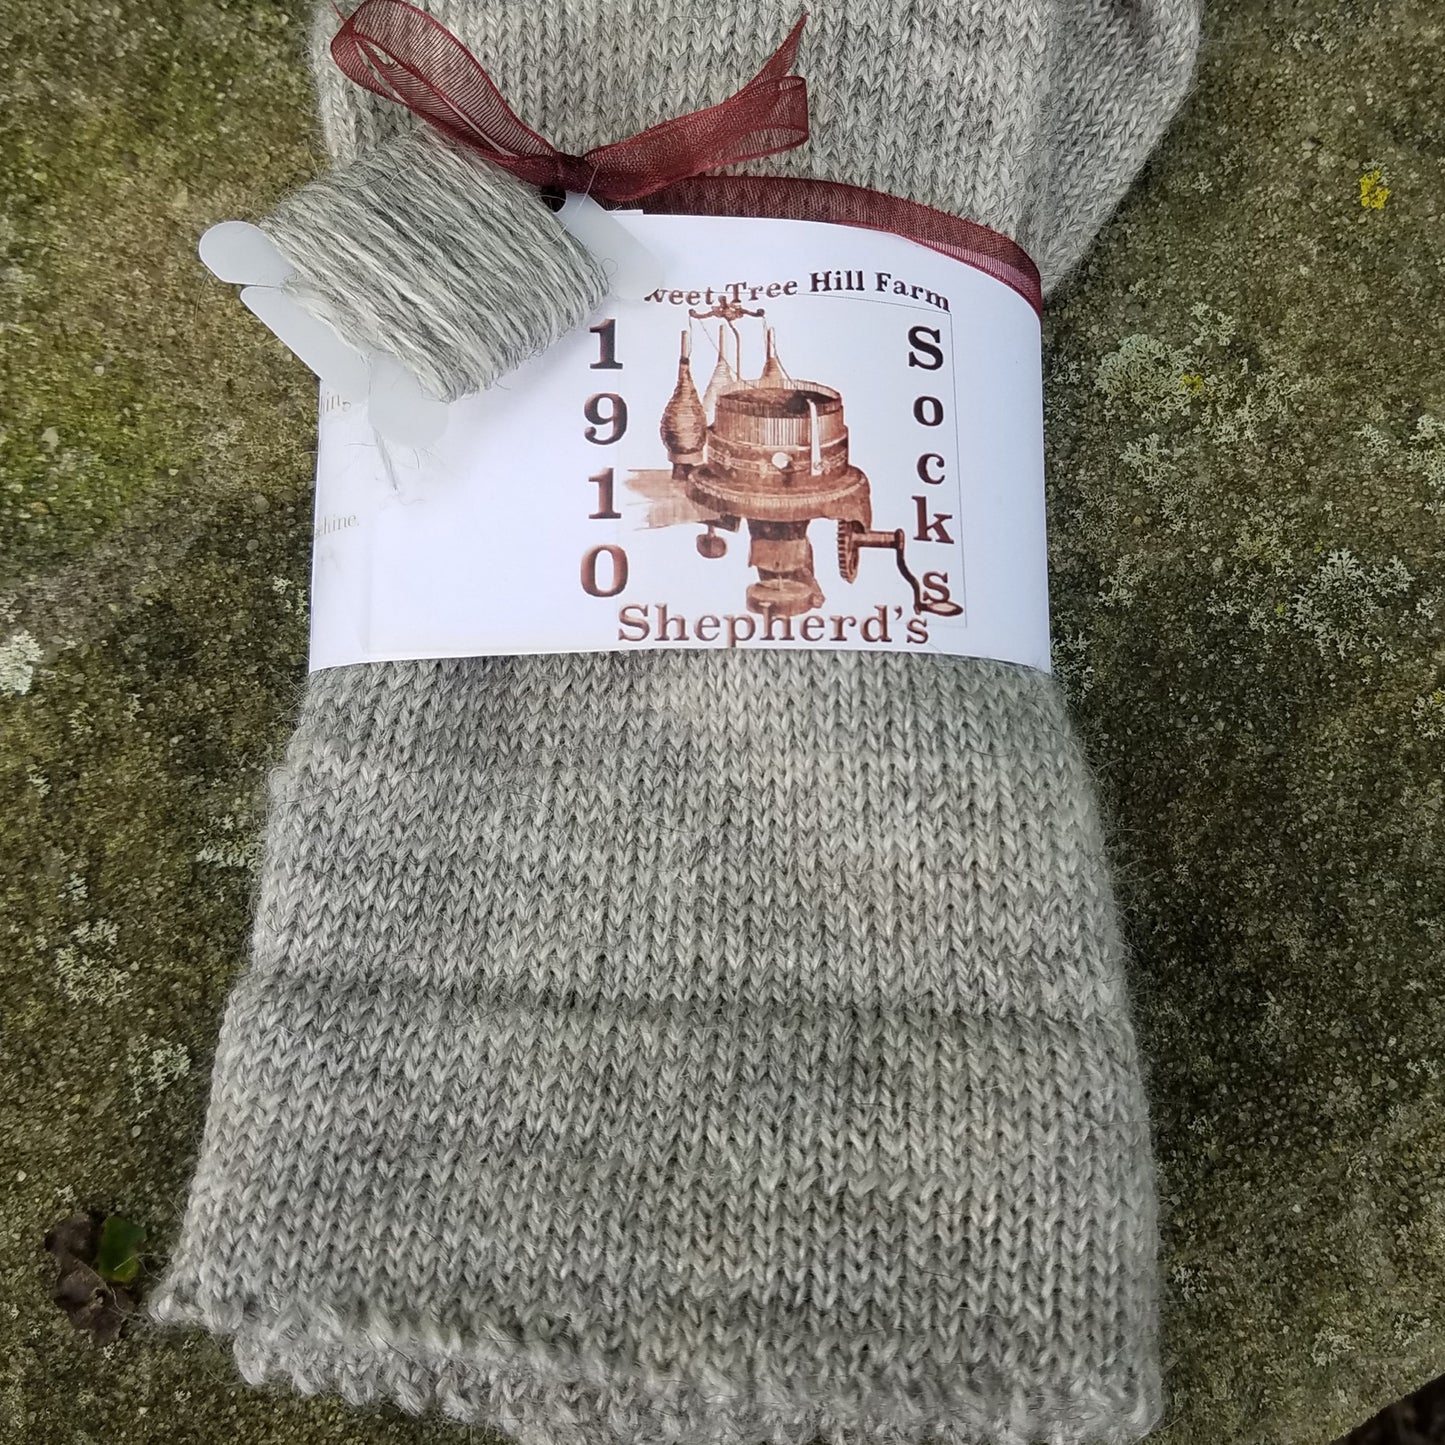 United States, Kathleen Oliver / Sweet Tree Hill Farm, Shepherd’s Simply Socks in Natural Silver Gotland Wool with Picot Edge